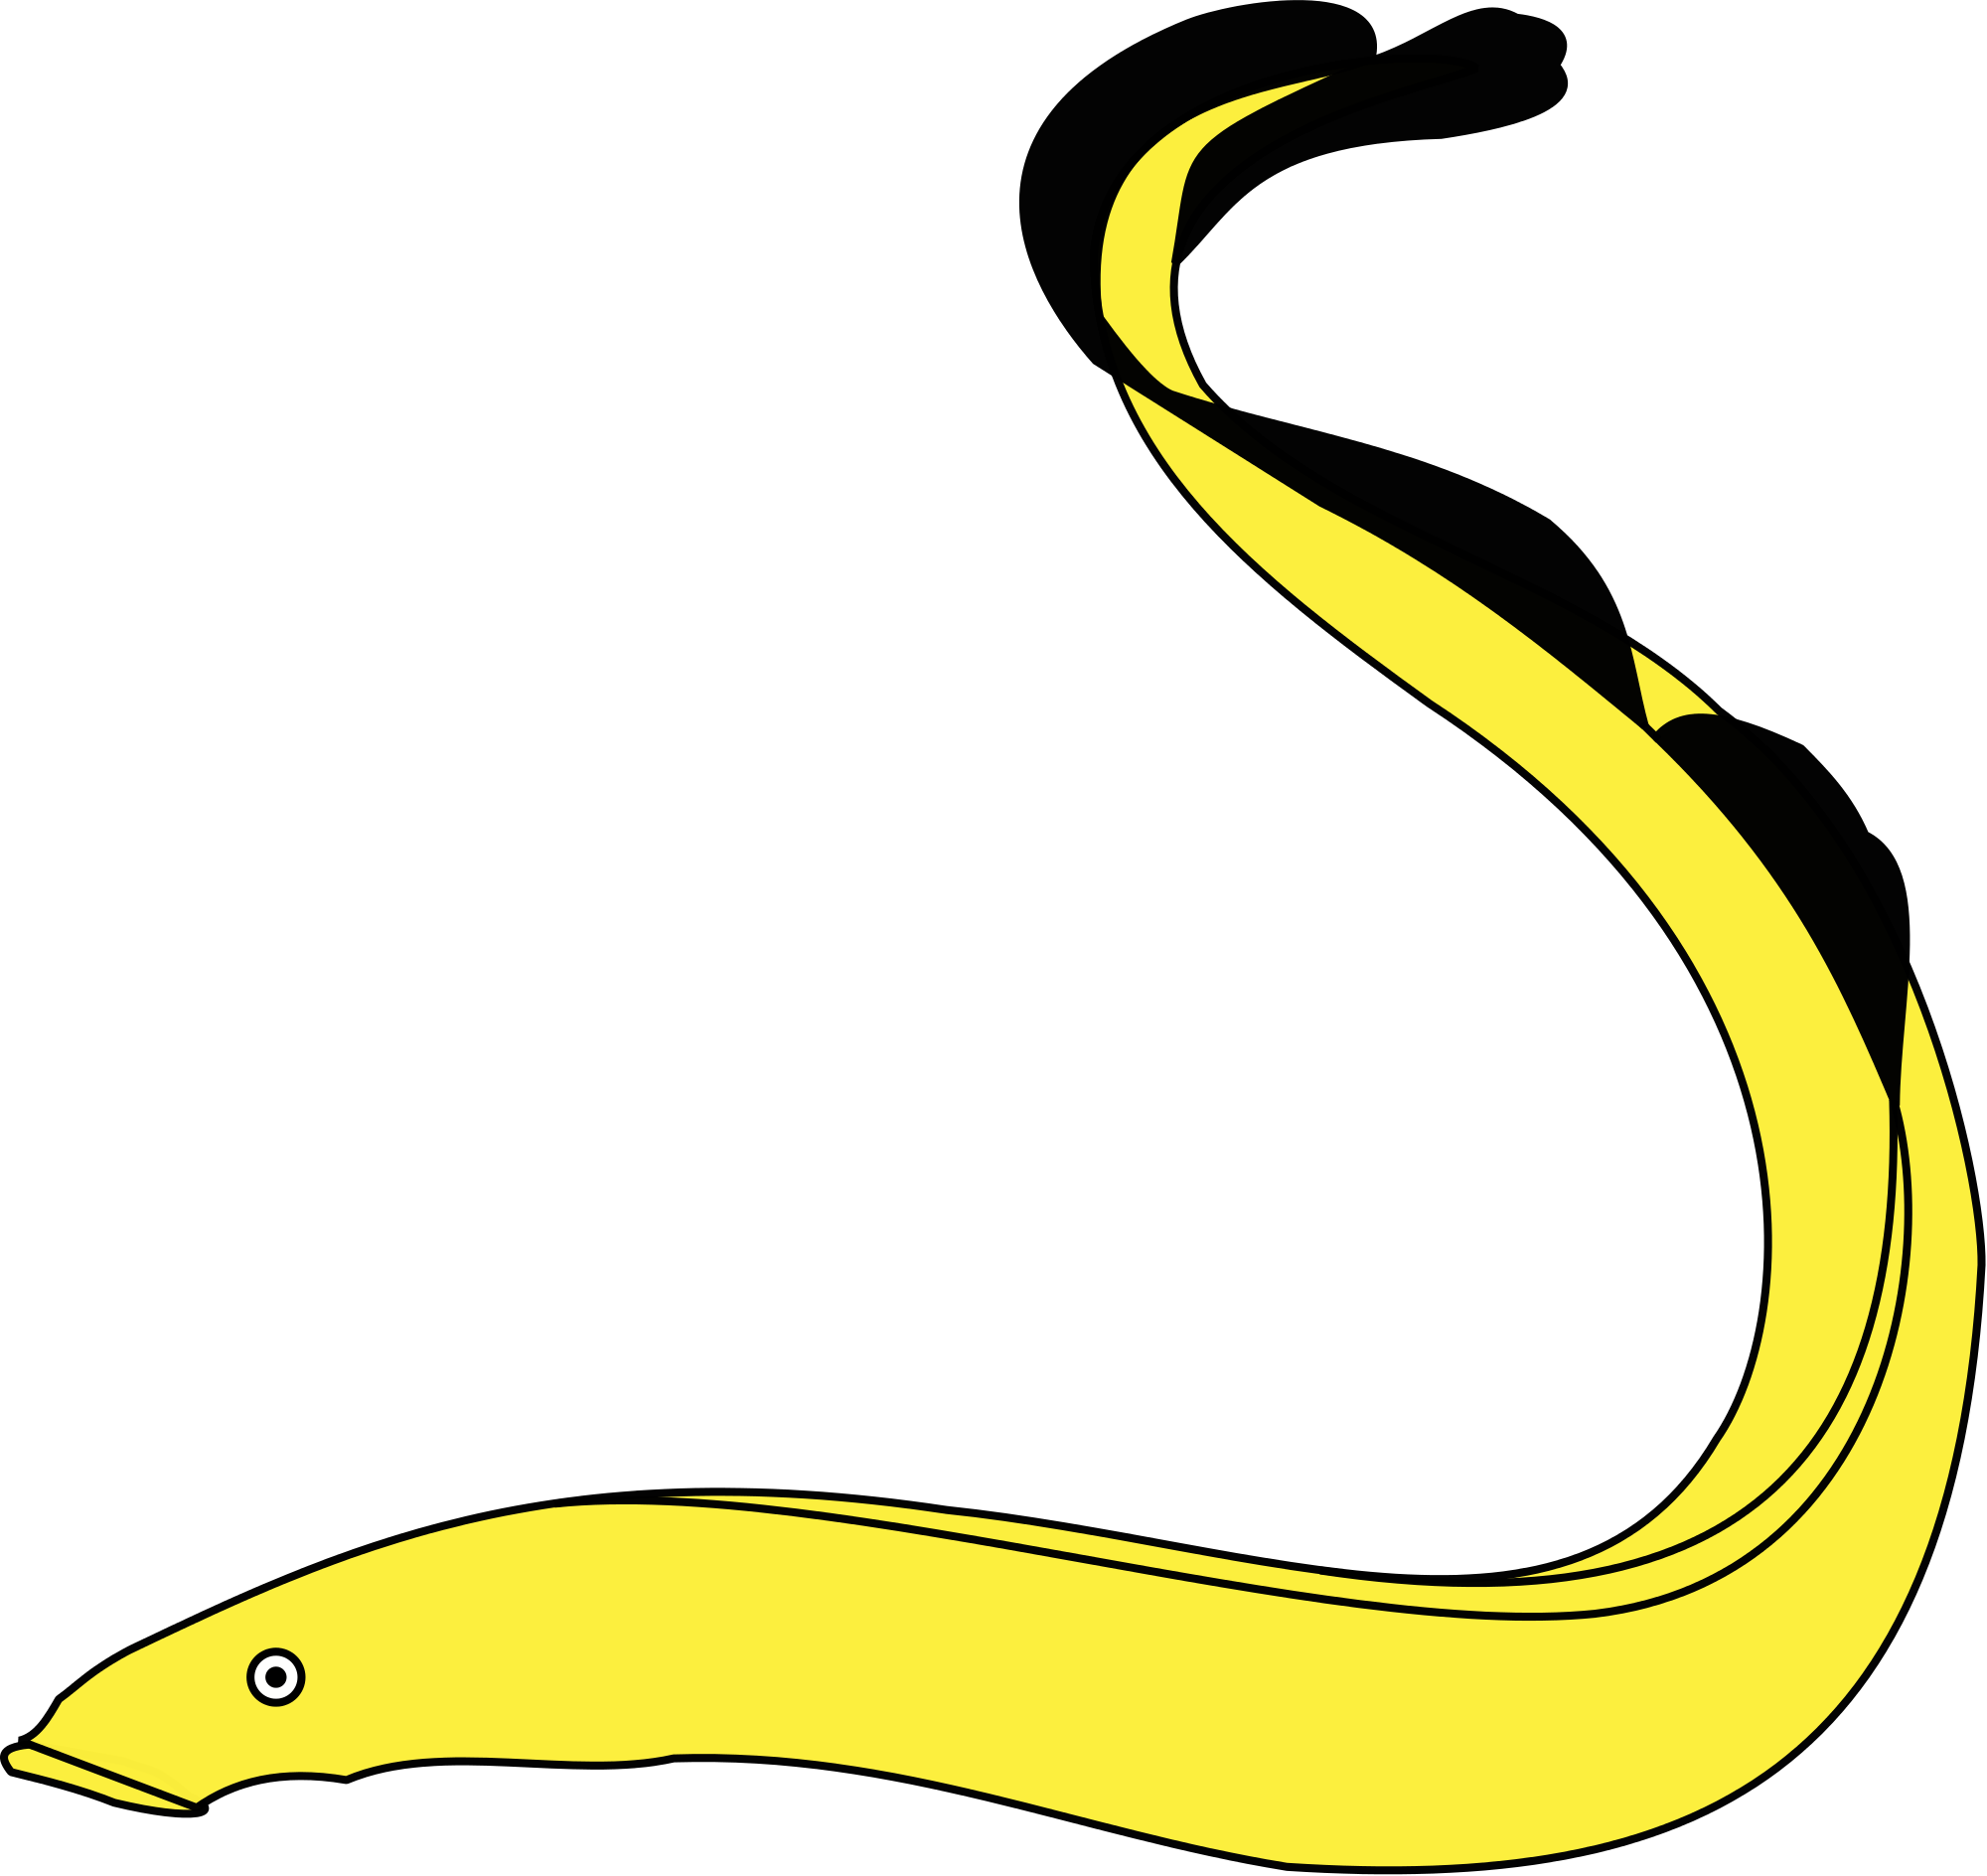 A Yellow Fish With Black Outline